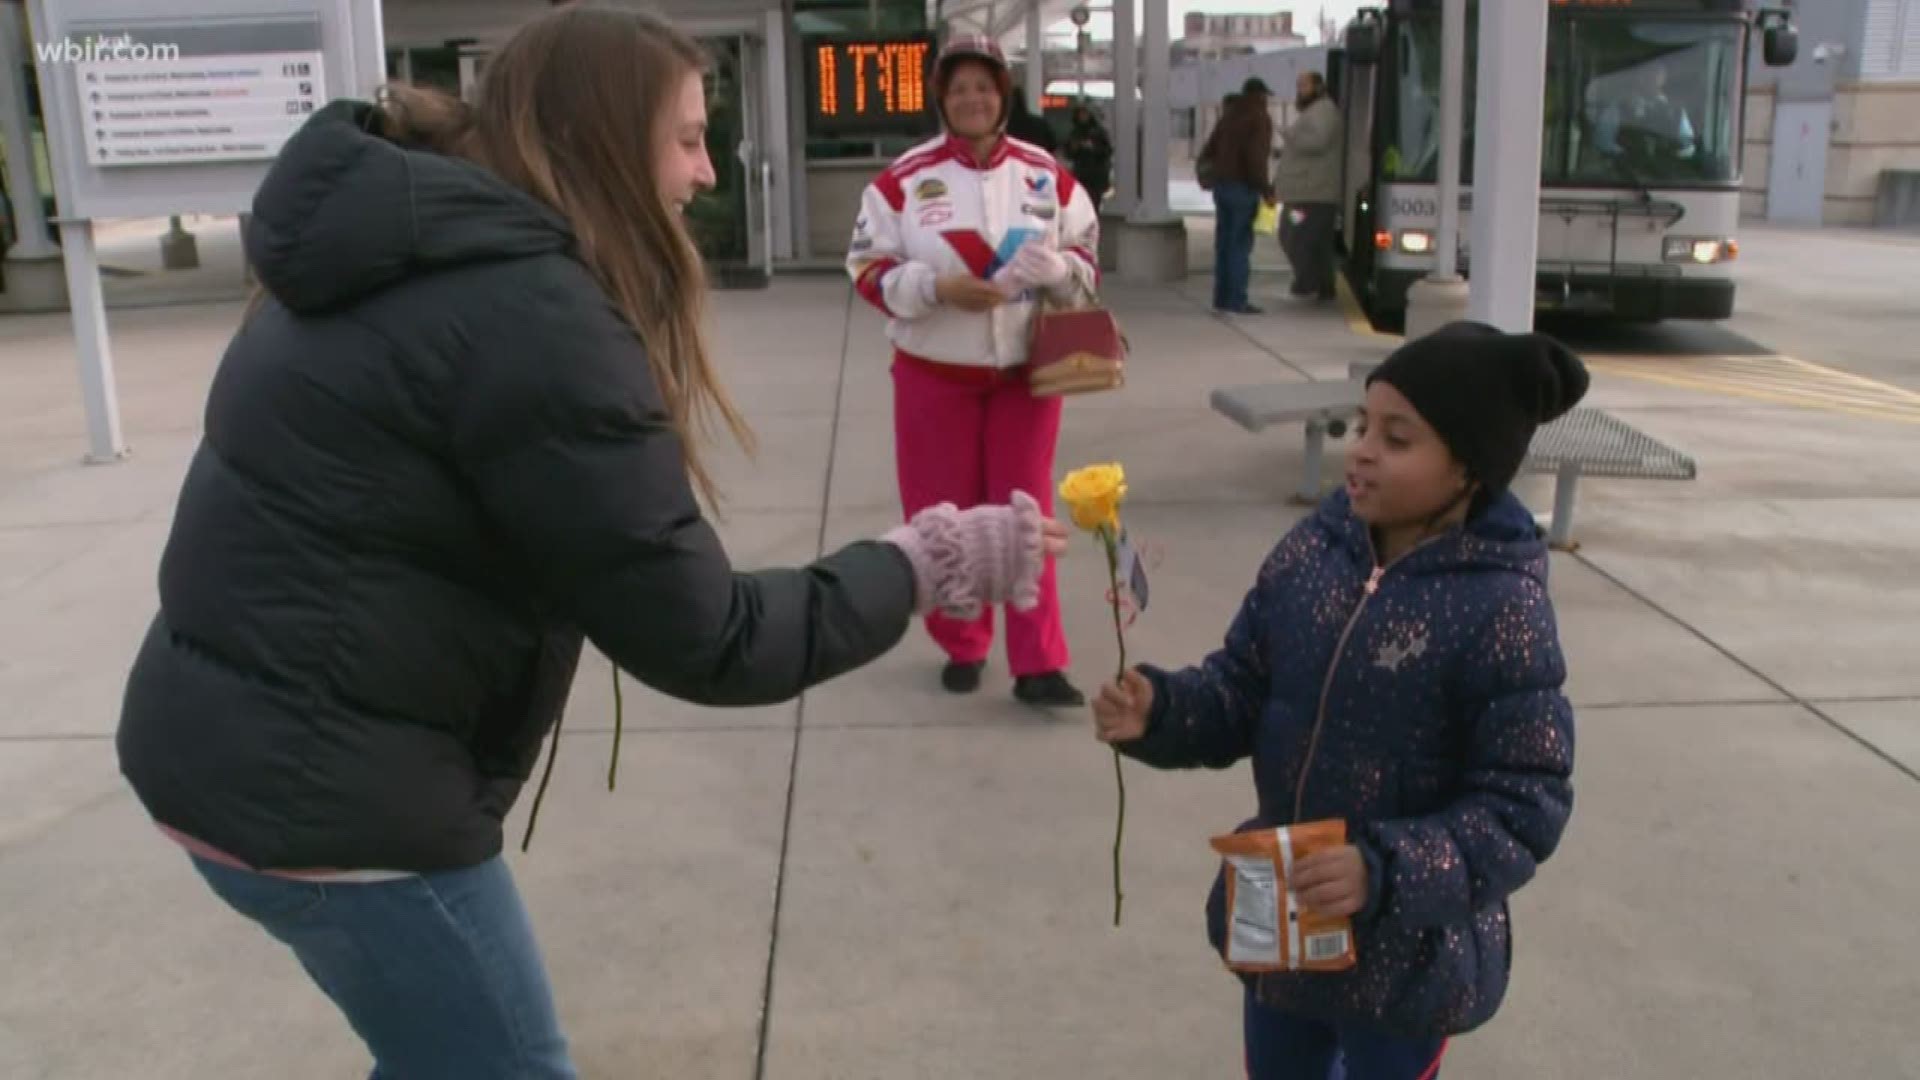 Hundreds of people got a Valentine's Day surprise while riding the bus today.